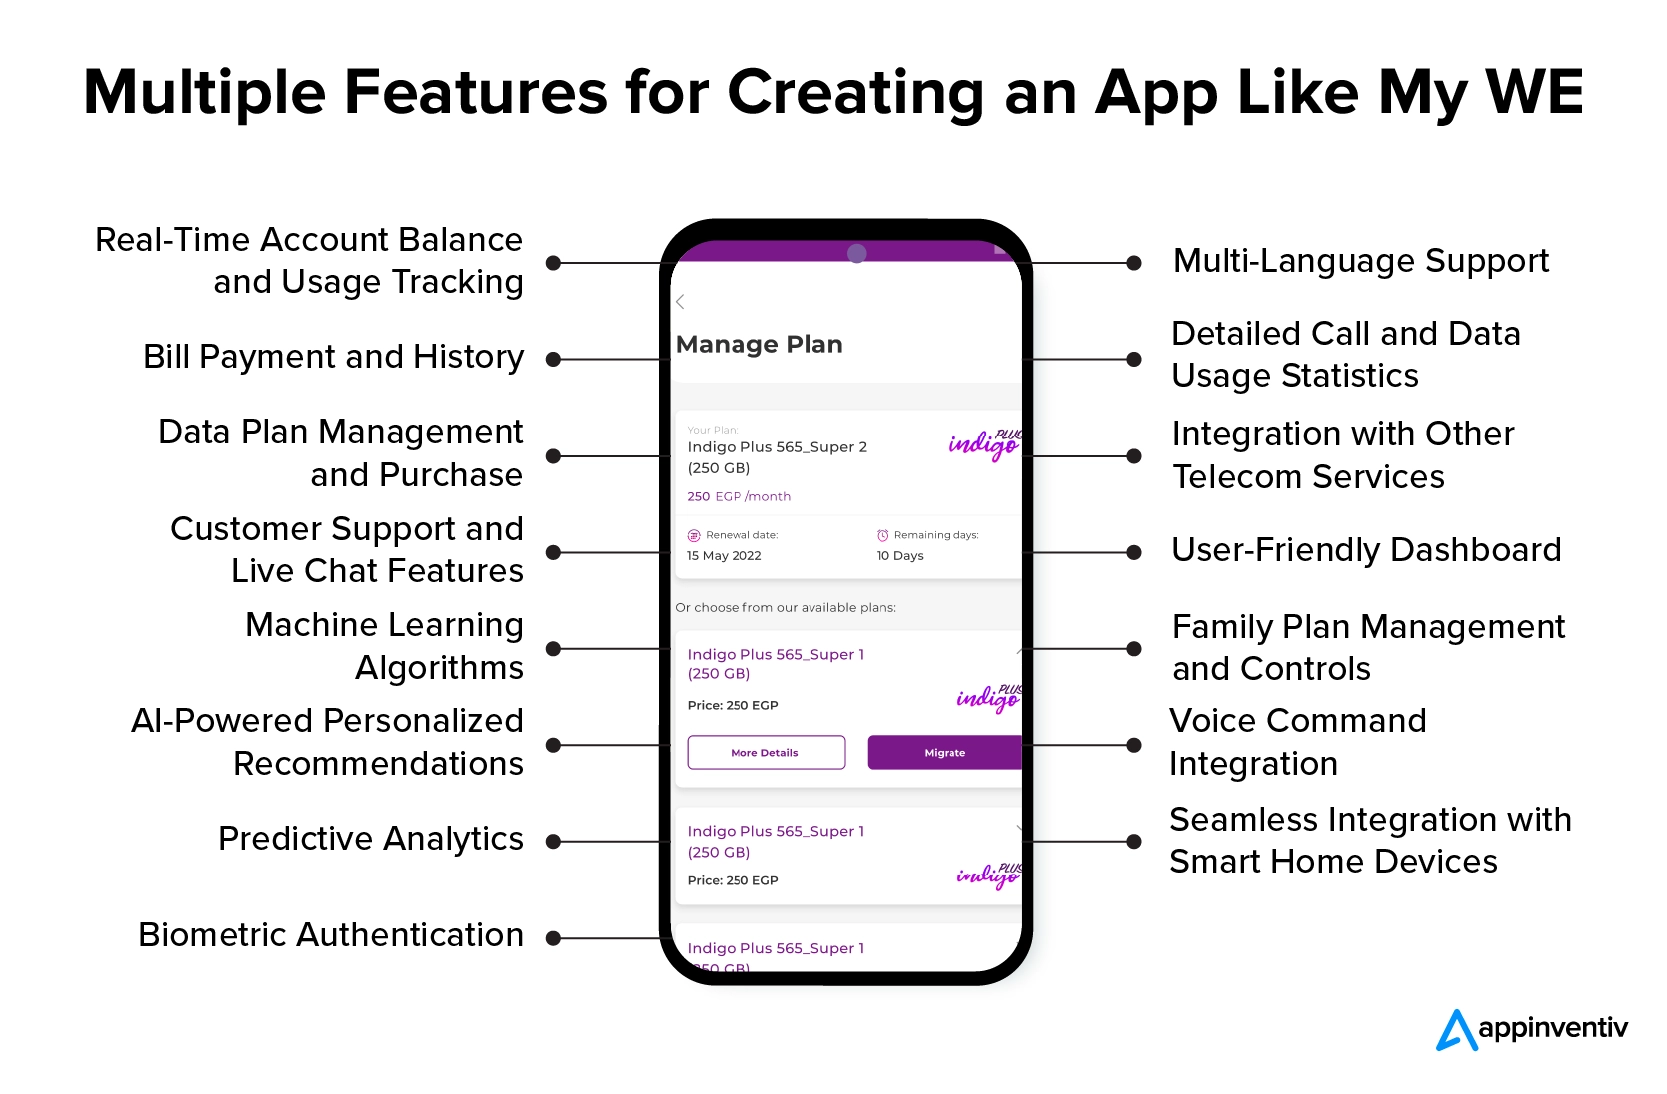 Features for creating an app like My WE